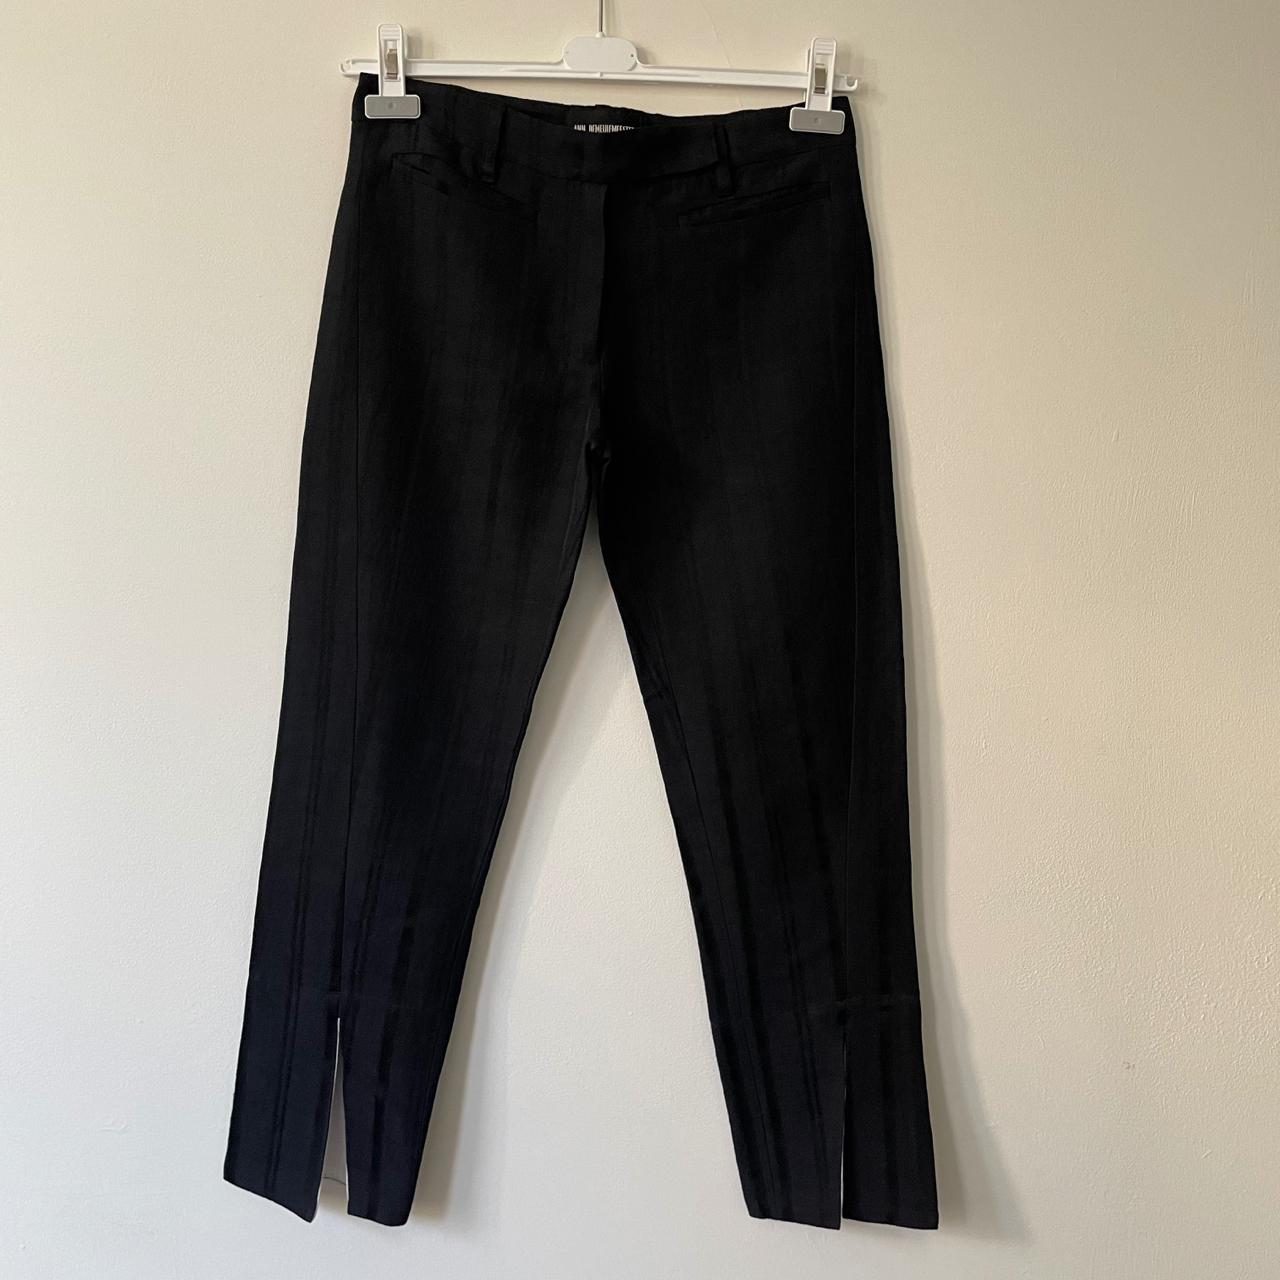 Ann Demeulemeester cropped jacquard pants, with... - Depop